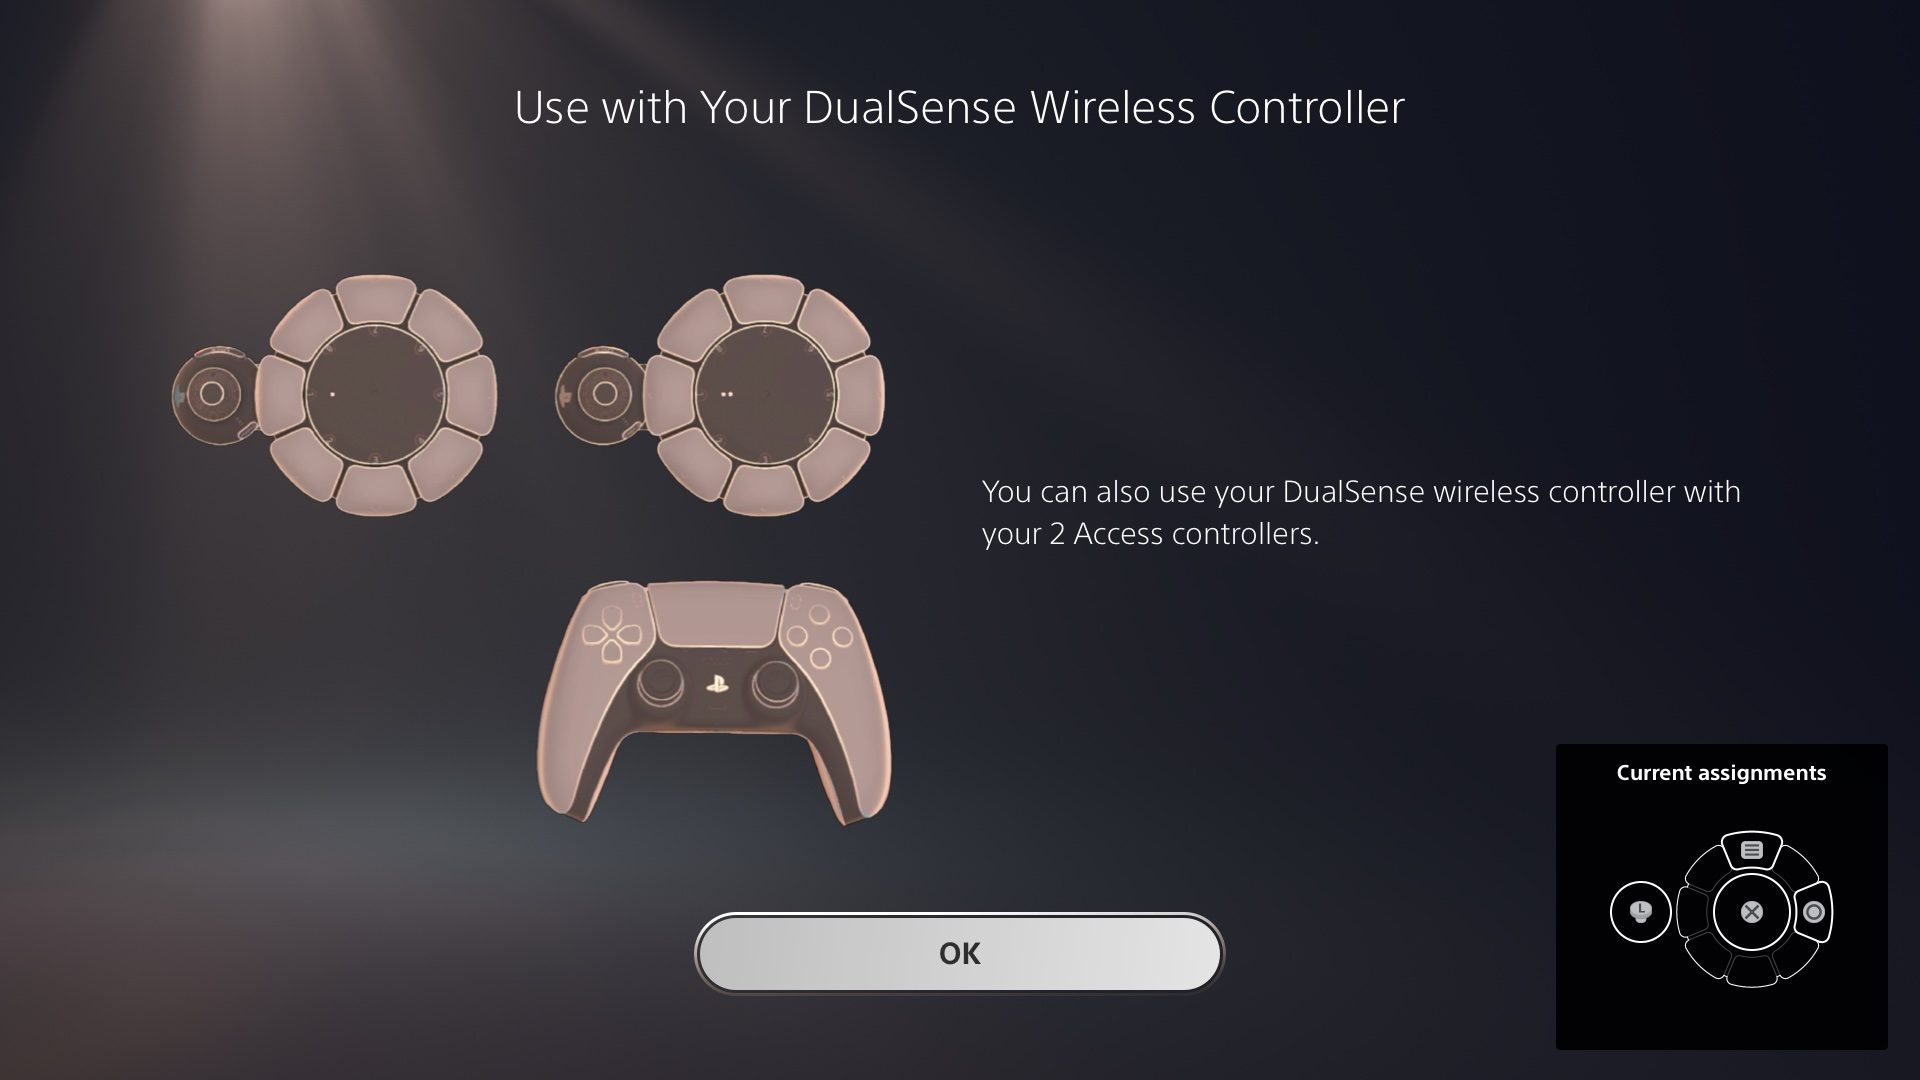 Image of an access controller user interface showing the ability to pair up to two Access controllers with a DualSense controller